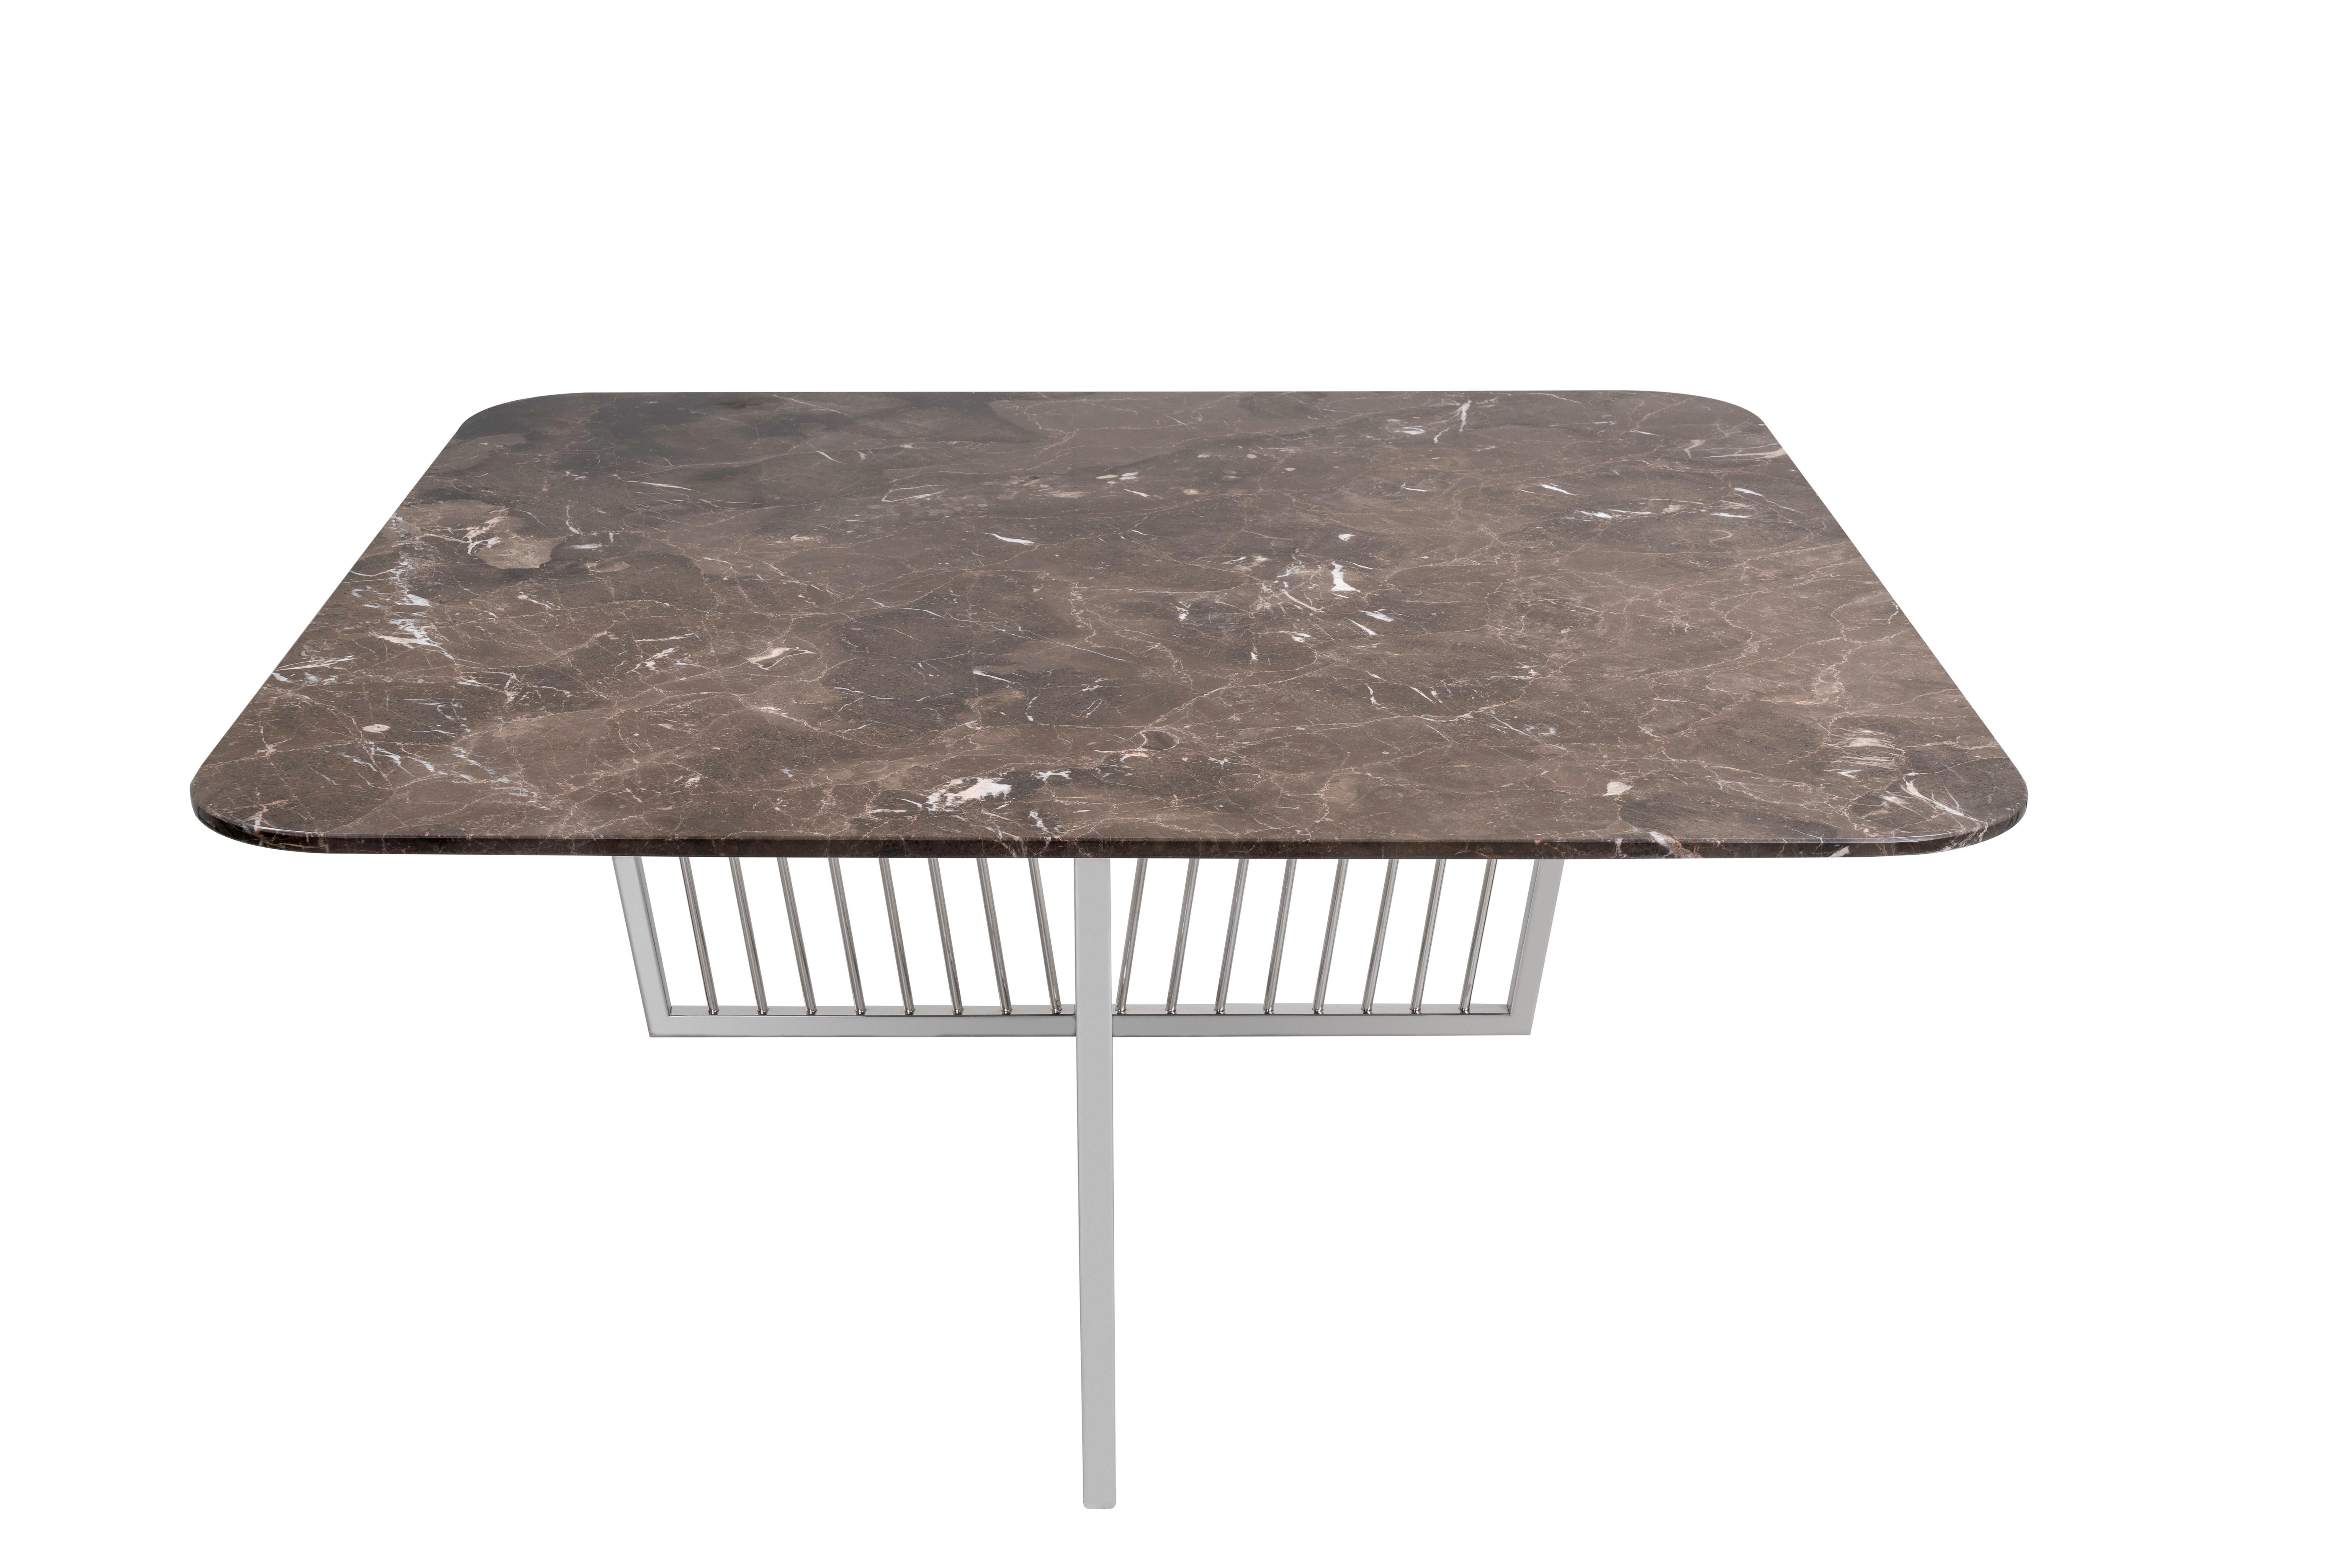 Very elegant and resistant, with polished stainless steel base and marron emperador marble top. This table can be used in every modern living room decor, combining the sophistication of the natural stone with the metal base.

 
 
    